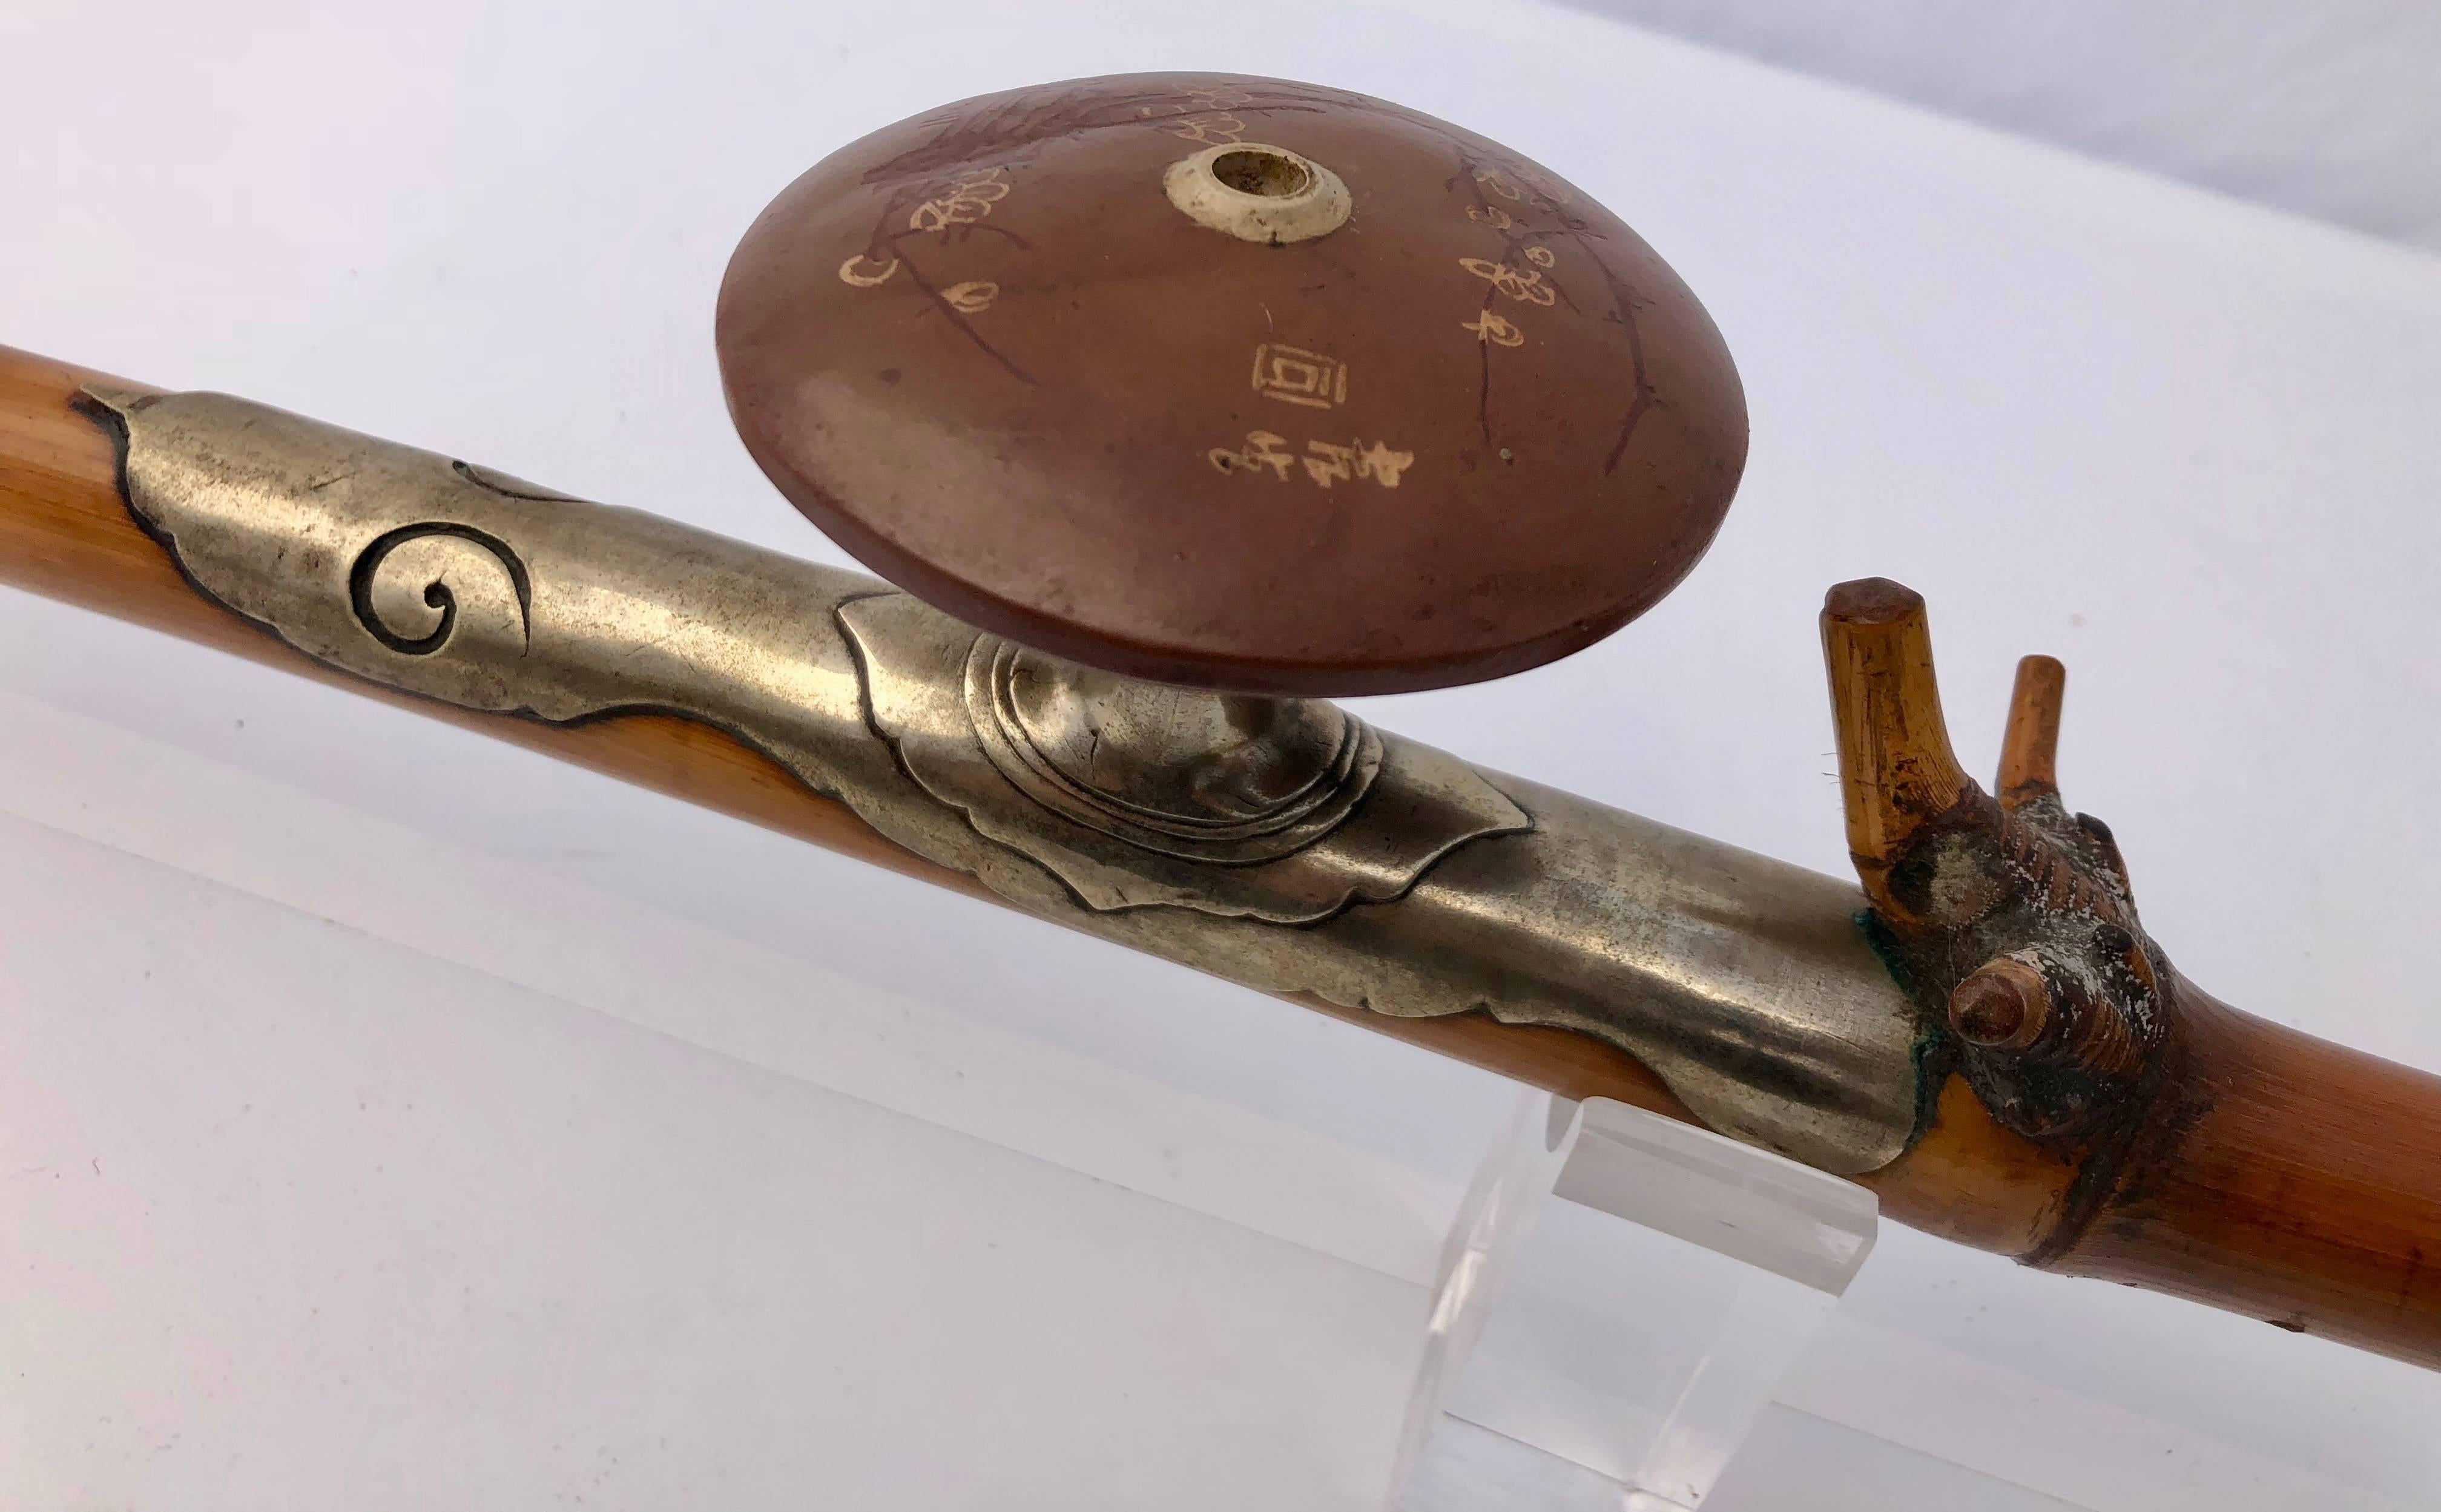 This early 19th century Chinese opium pipe has a bamboo body and silver saddle with a jade mouthpiece and cap. The yixing bowl is inscribed in Chinese and decorated with lotus flowers. 

The lotus is considered divine and one of nature's mystical